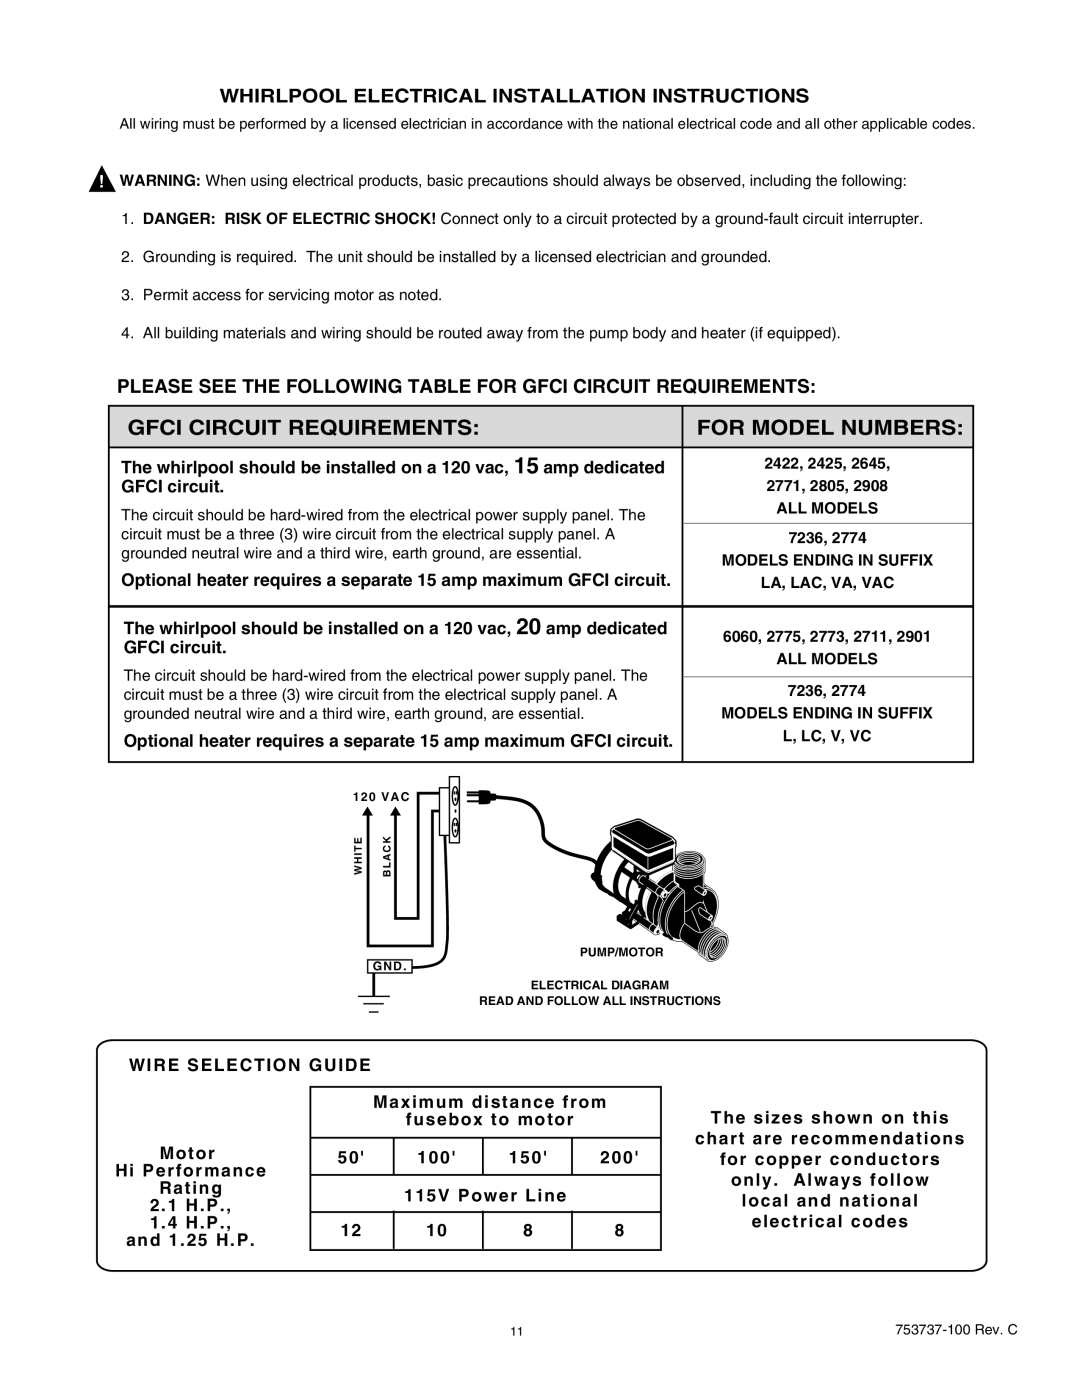 American Standard 2645LA Gfci Circuit Requirements, For Model Numbers, Whirlpool Electrical Installation Instructions 